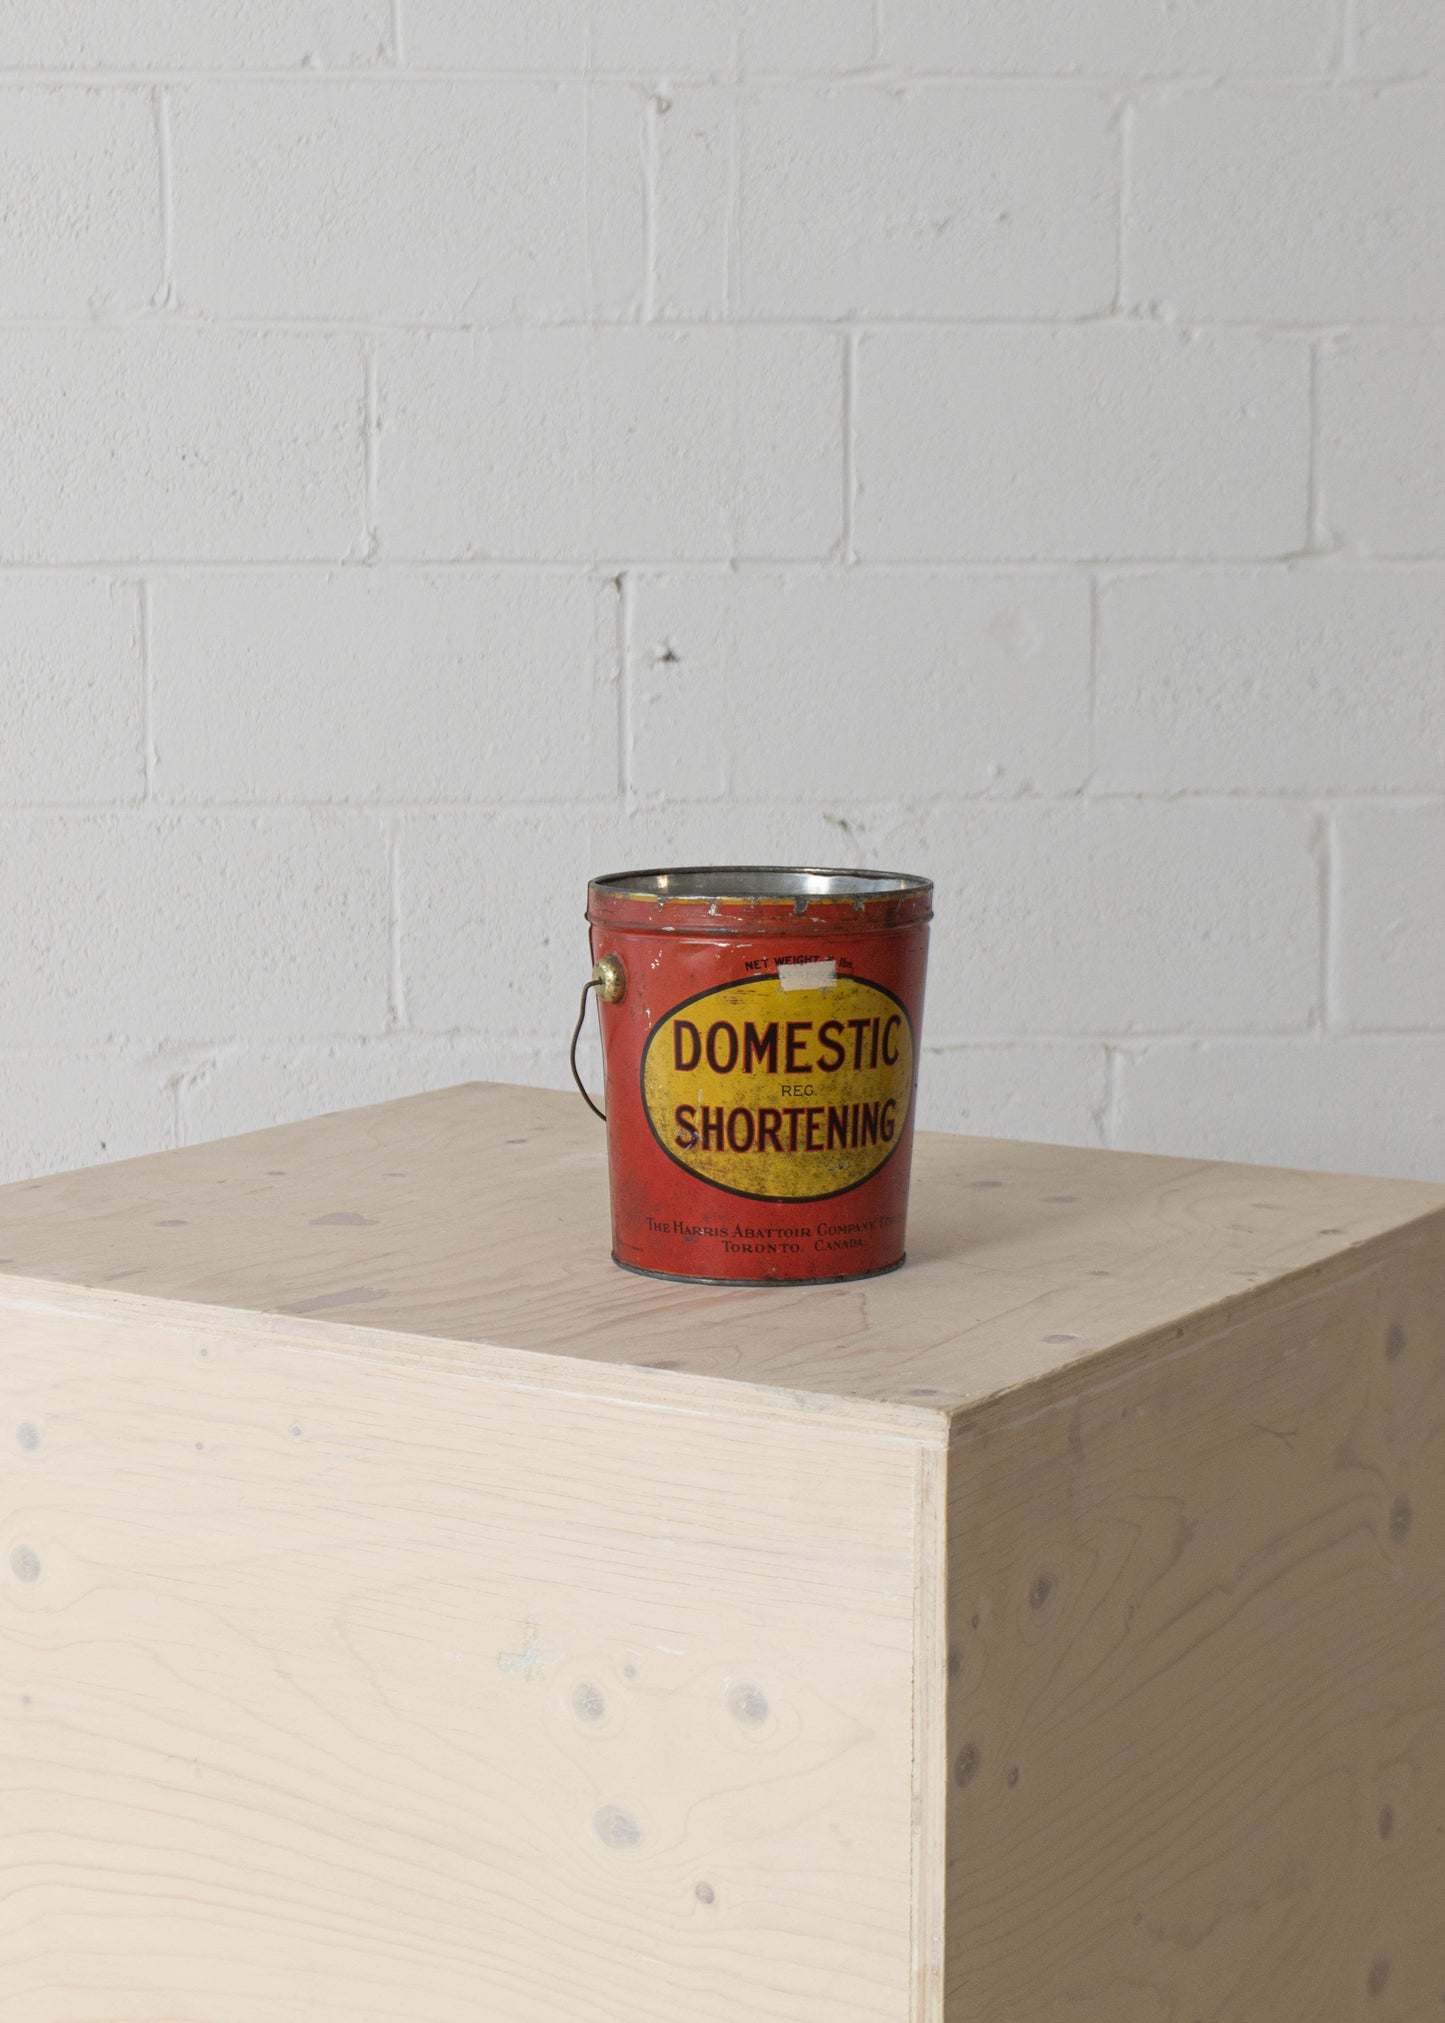 Vintage 1940s Domestic Shortening Canister